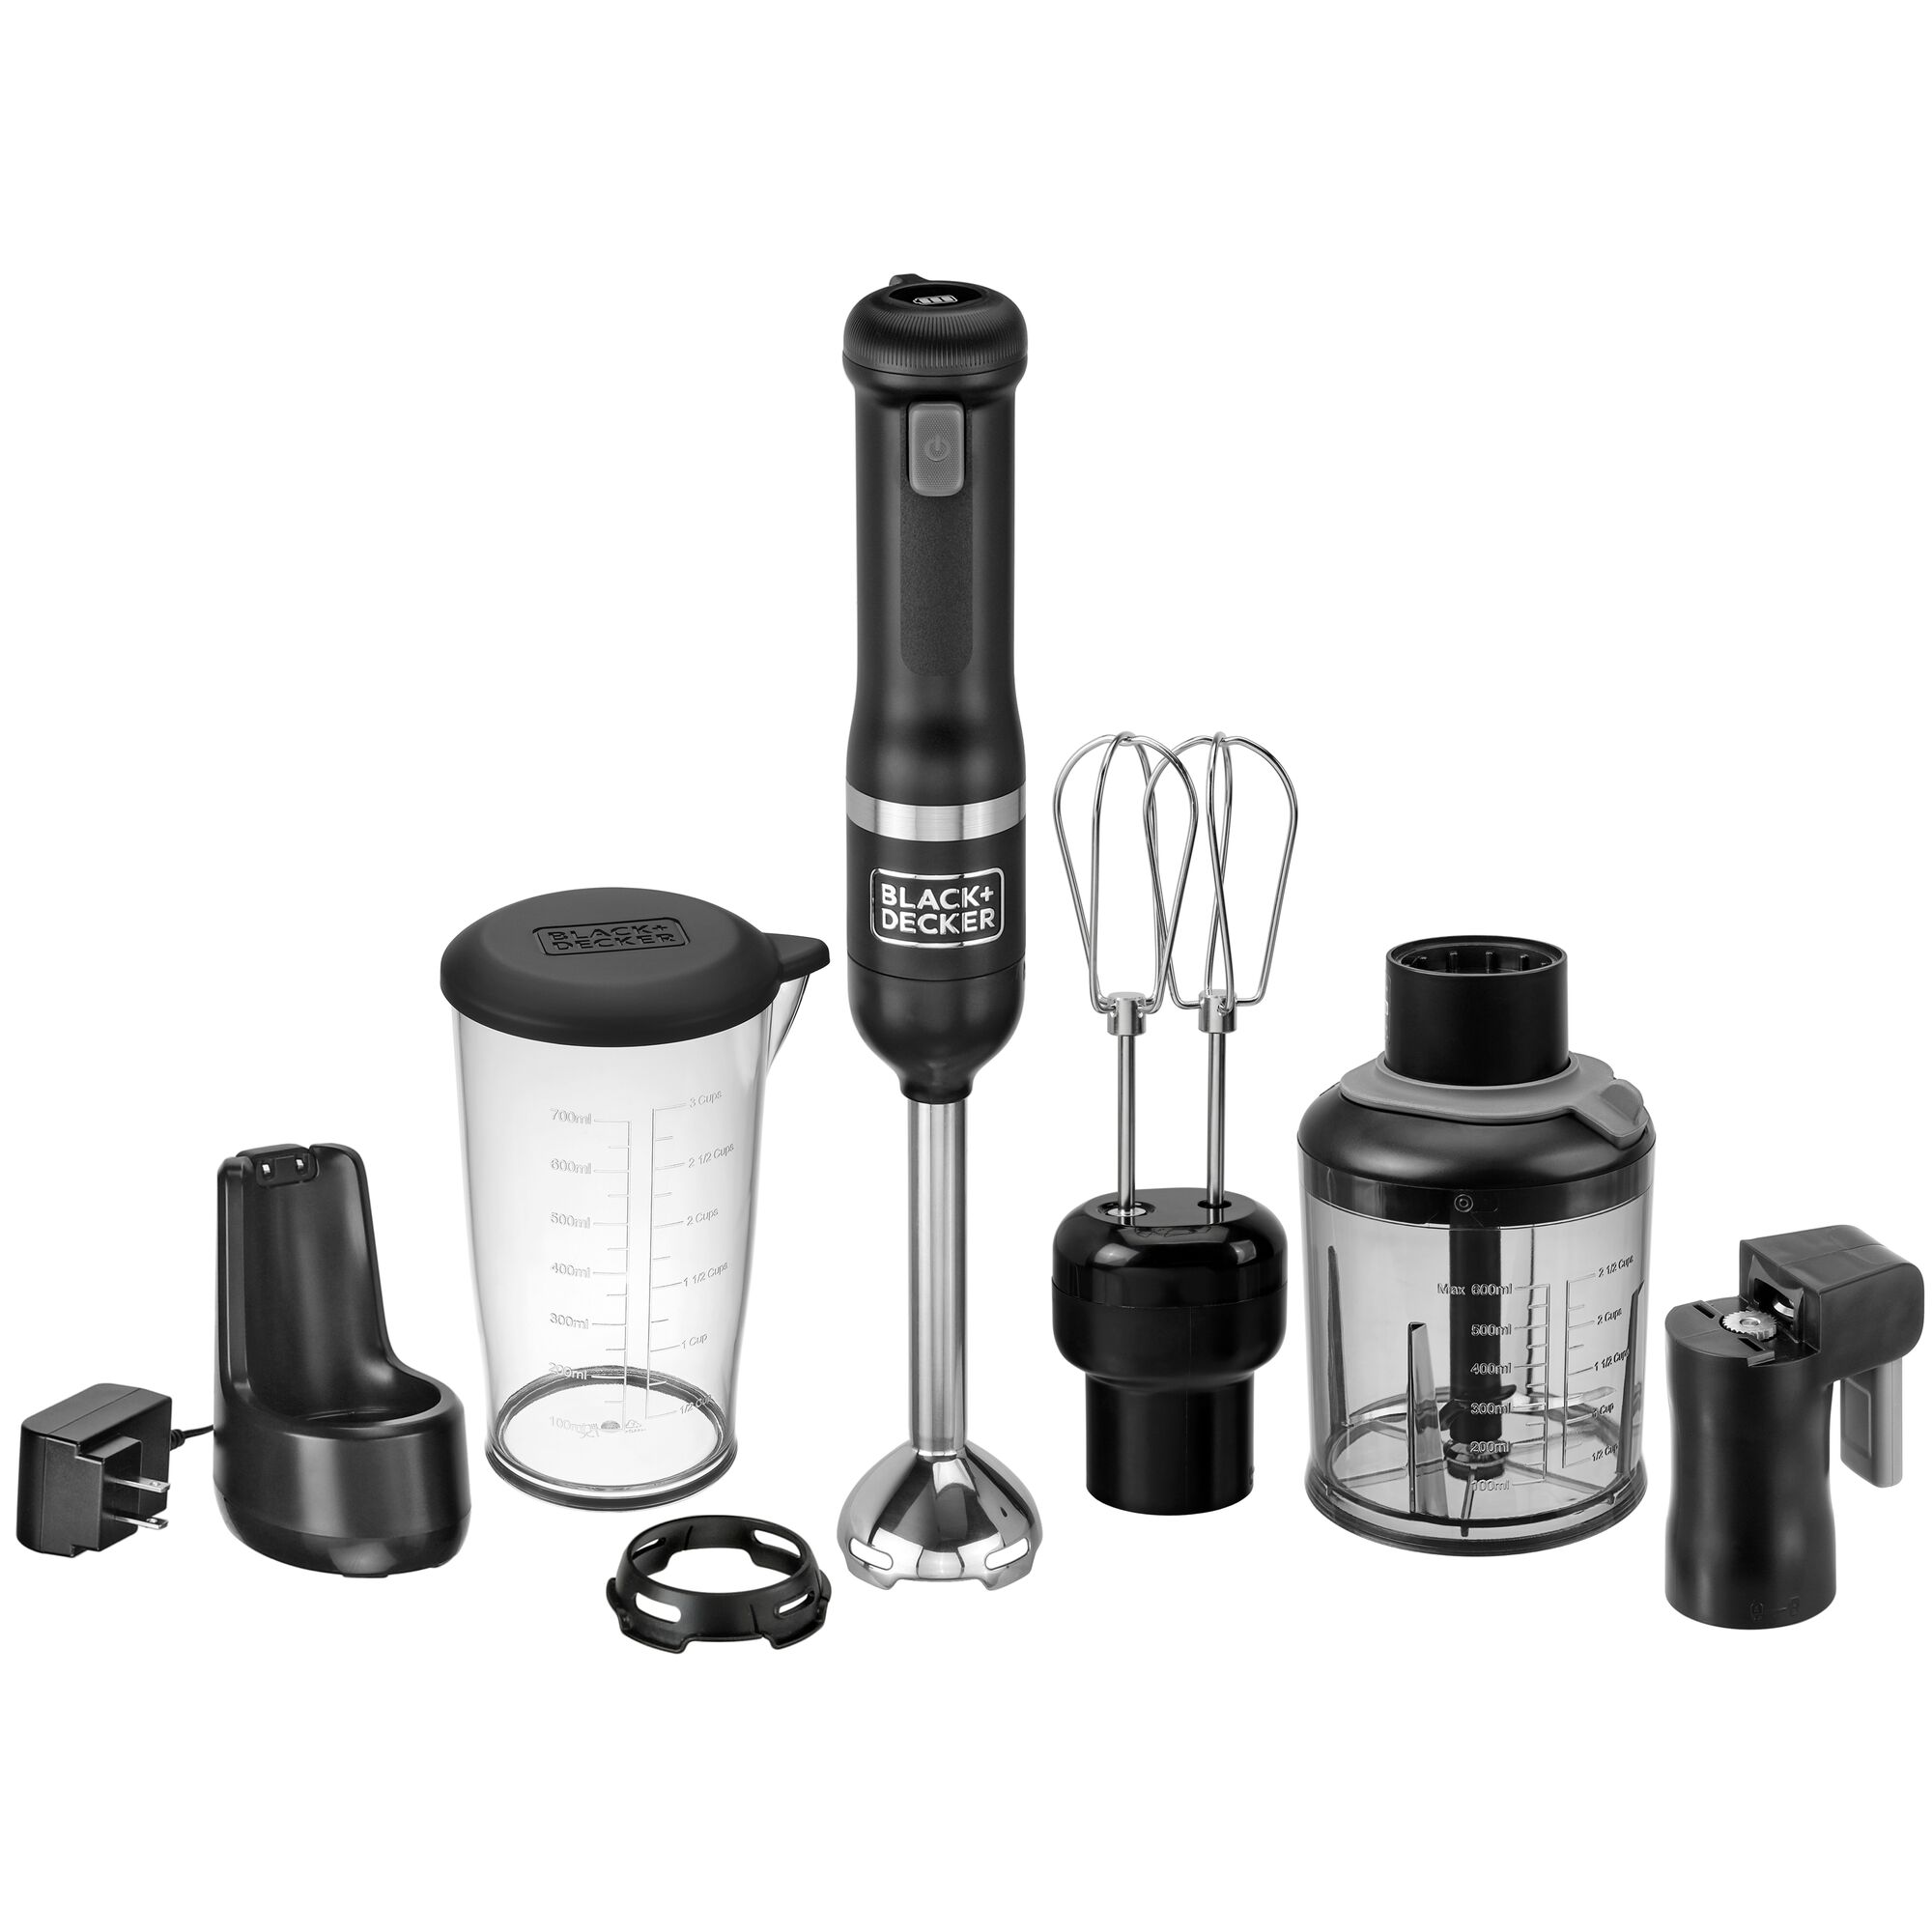 Front view of BLACK+DECKER kitchen wand 3in1 Cordless Kitchen multi-tool kit in black featuring immersion blender, hand mixer, can opener and food chopper atachments